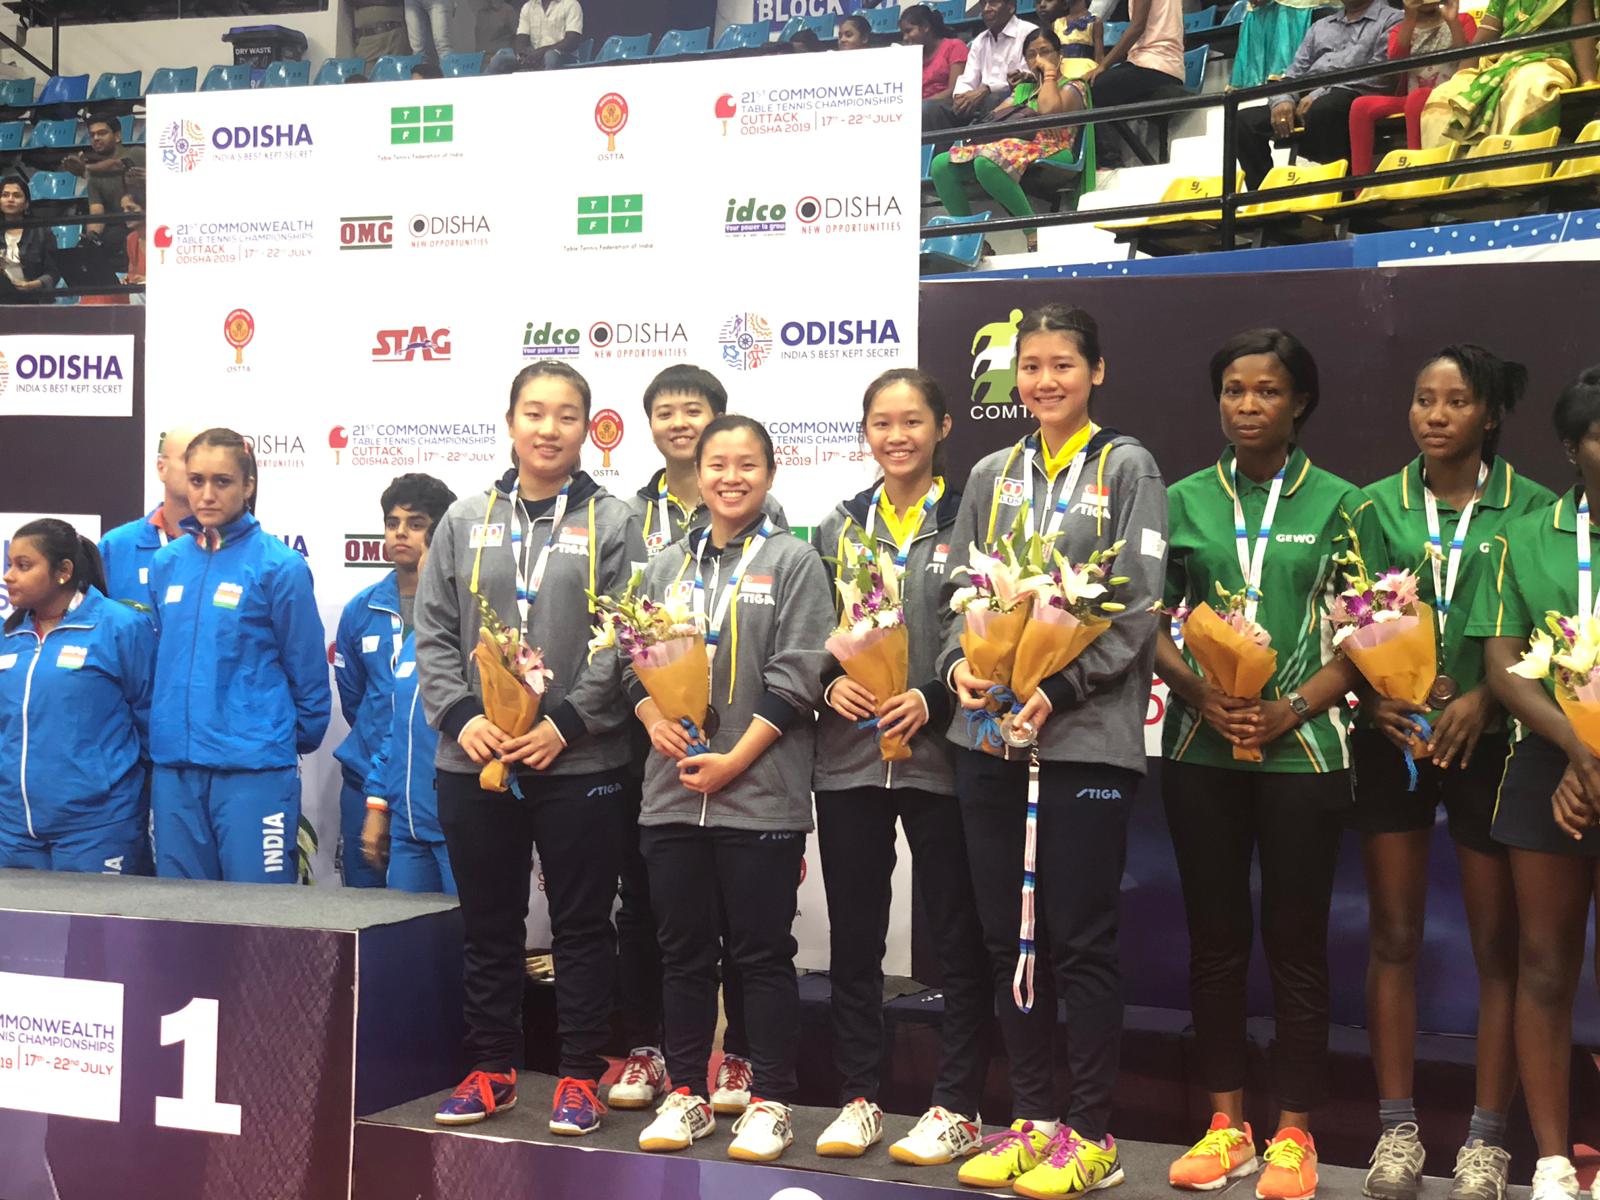 Team Singapore scored 2 bronzes at the 21st Commonwealth Table Tennis Championships